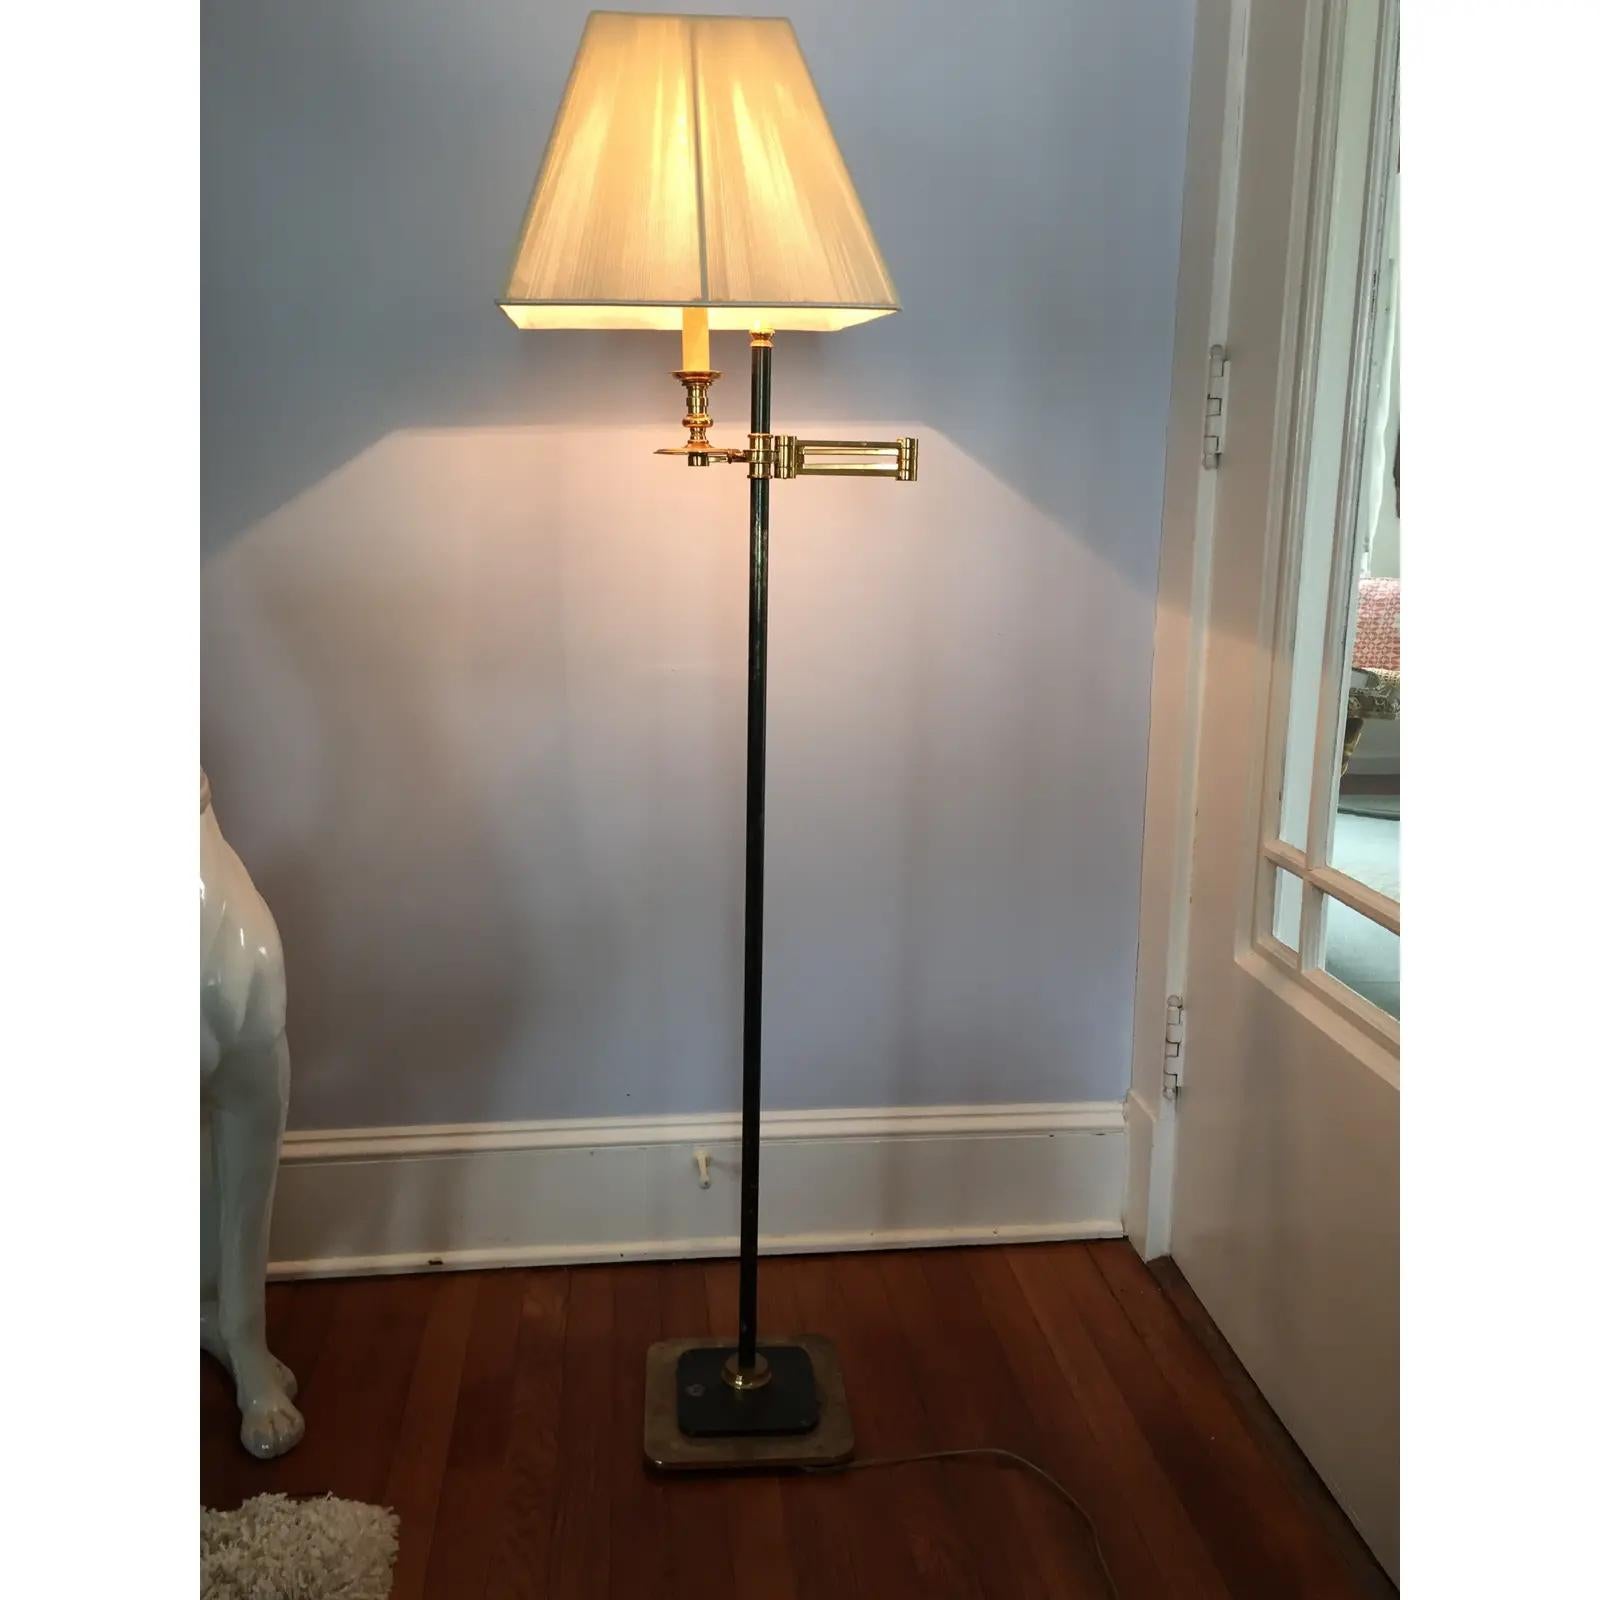 Exceptional Brass Floor lamp. Multi-directional swing arm and decorative finials. This lamp is heavy with black metal base and main tube and brass. Beautifully designed - solid with tight movements. Classy! See pics for condition. Functionally is